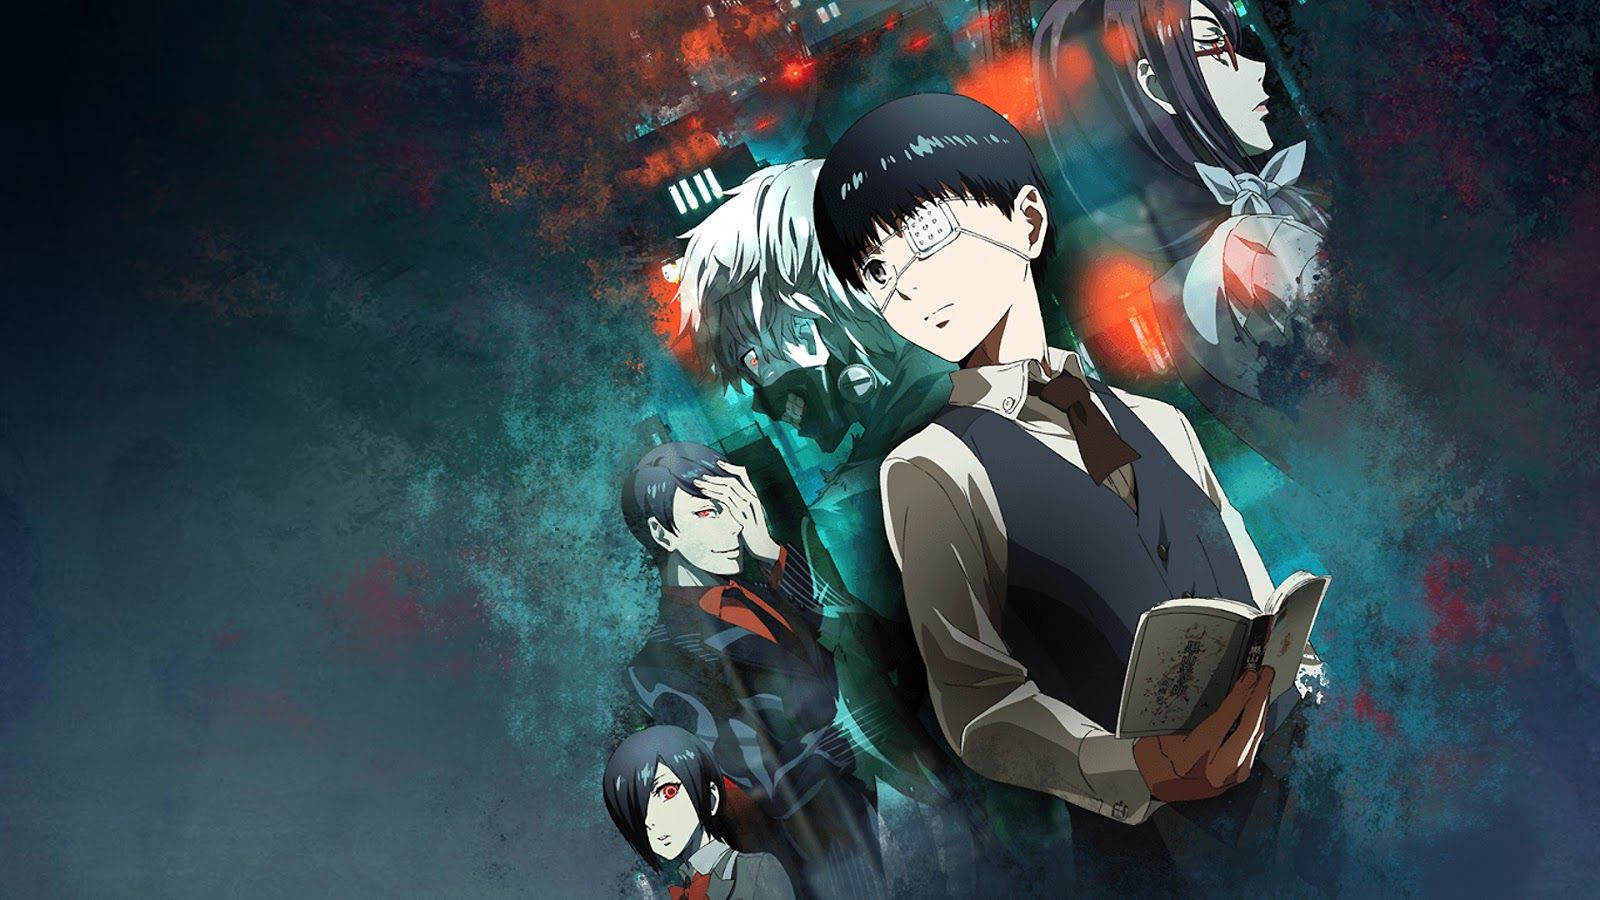 Anime Badass Tokyo Ghoul Wallpapers - Wallpaper Cave